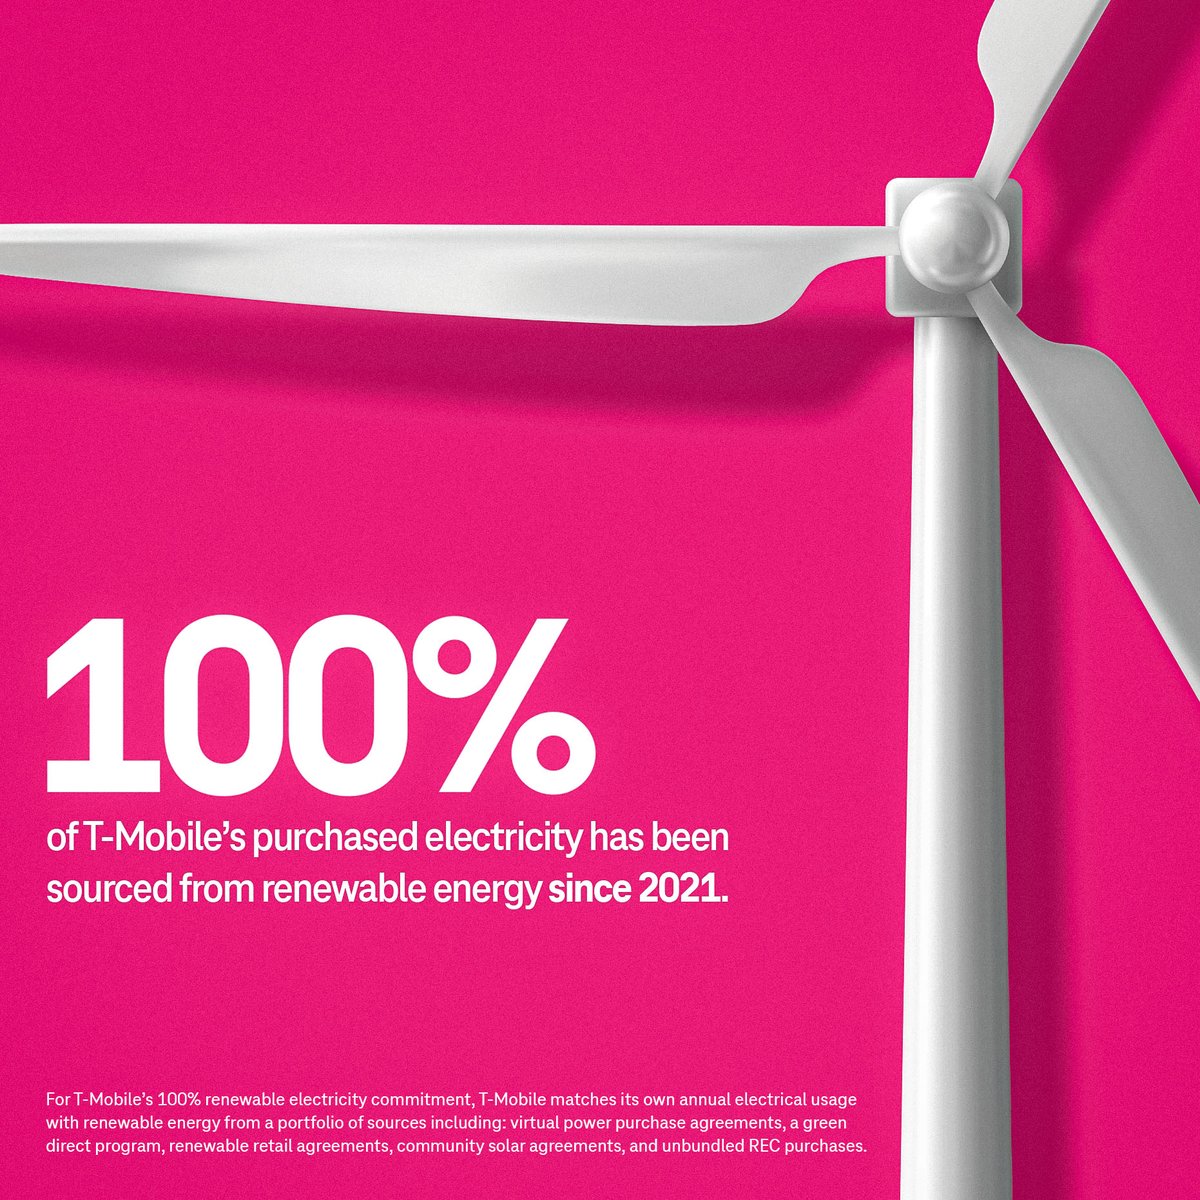 fun fact: @TMobile was the *first* wireless provider in the country to commit to sourcing 100% renewable electricity 👏

#TeamMagenta #EarthWeek